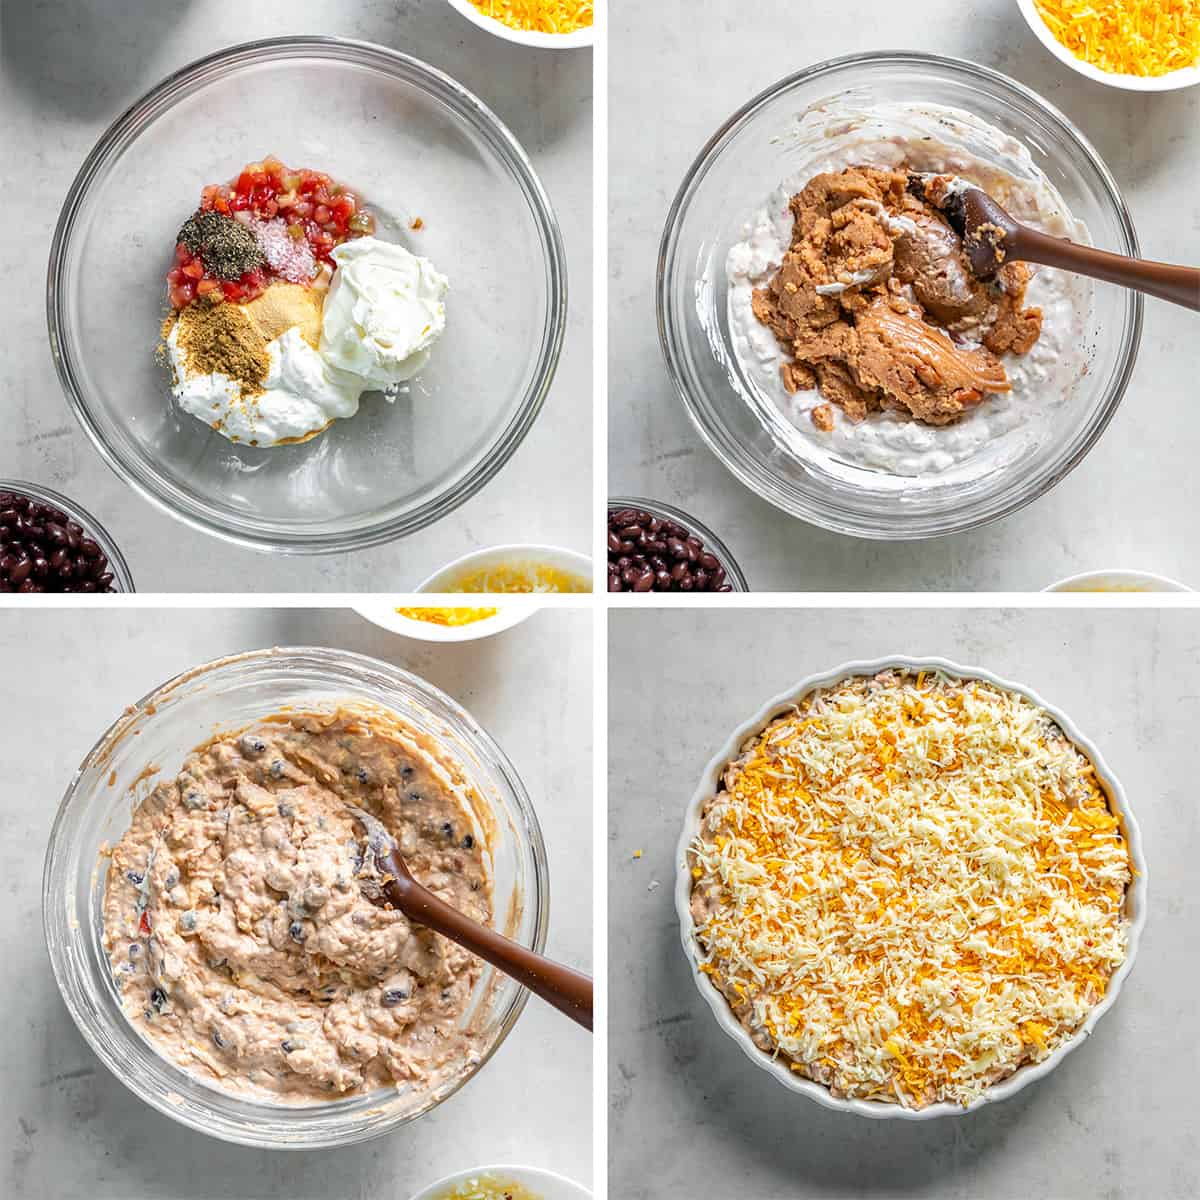 Four images of ingredients for bean dip being combined in a bowl and in a baking dish.